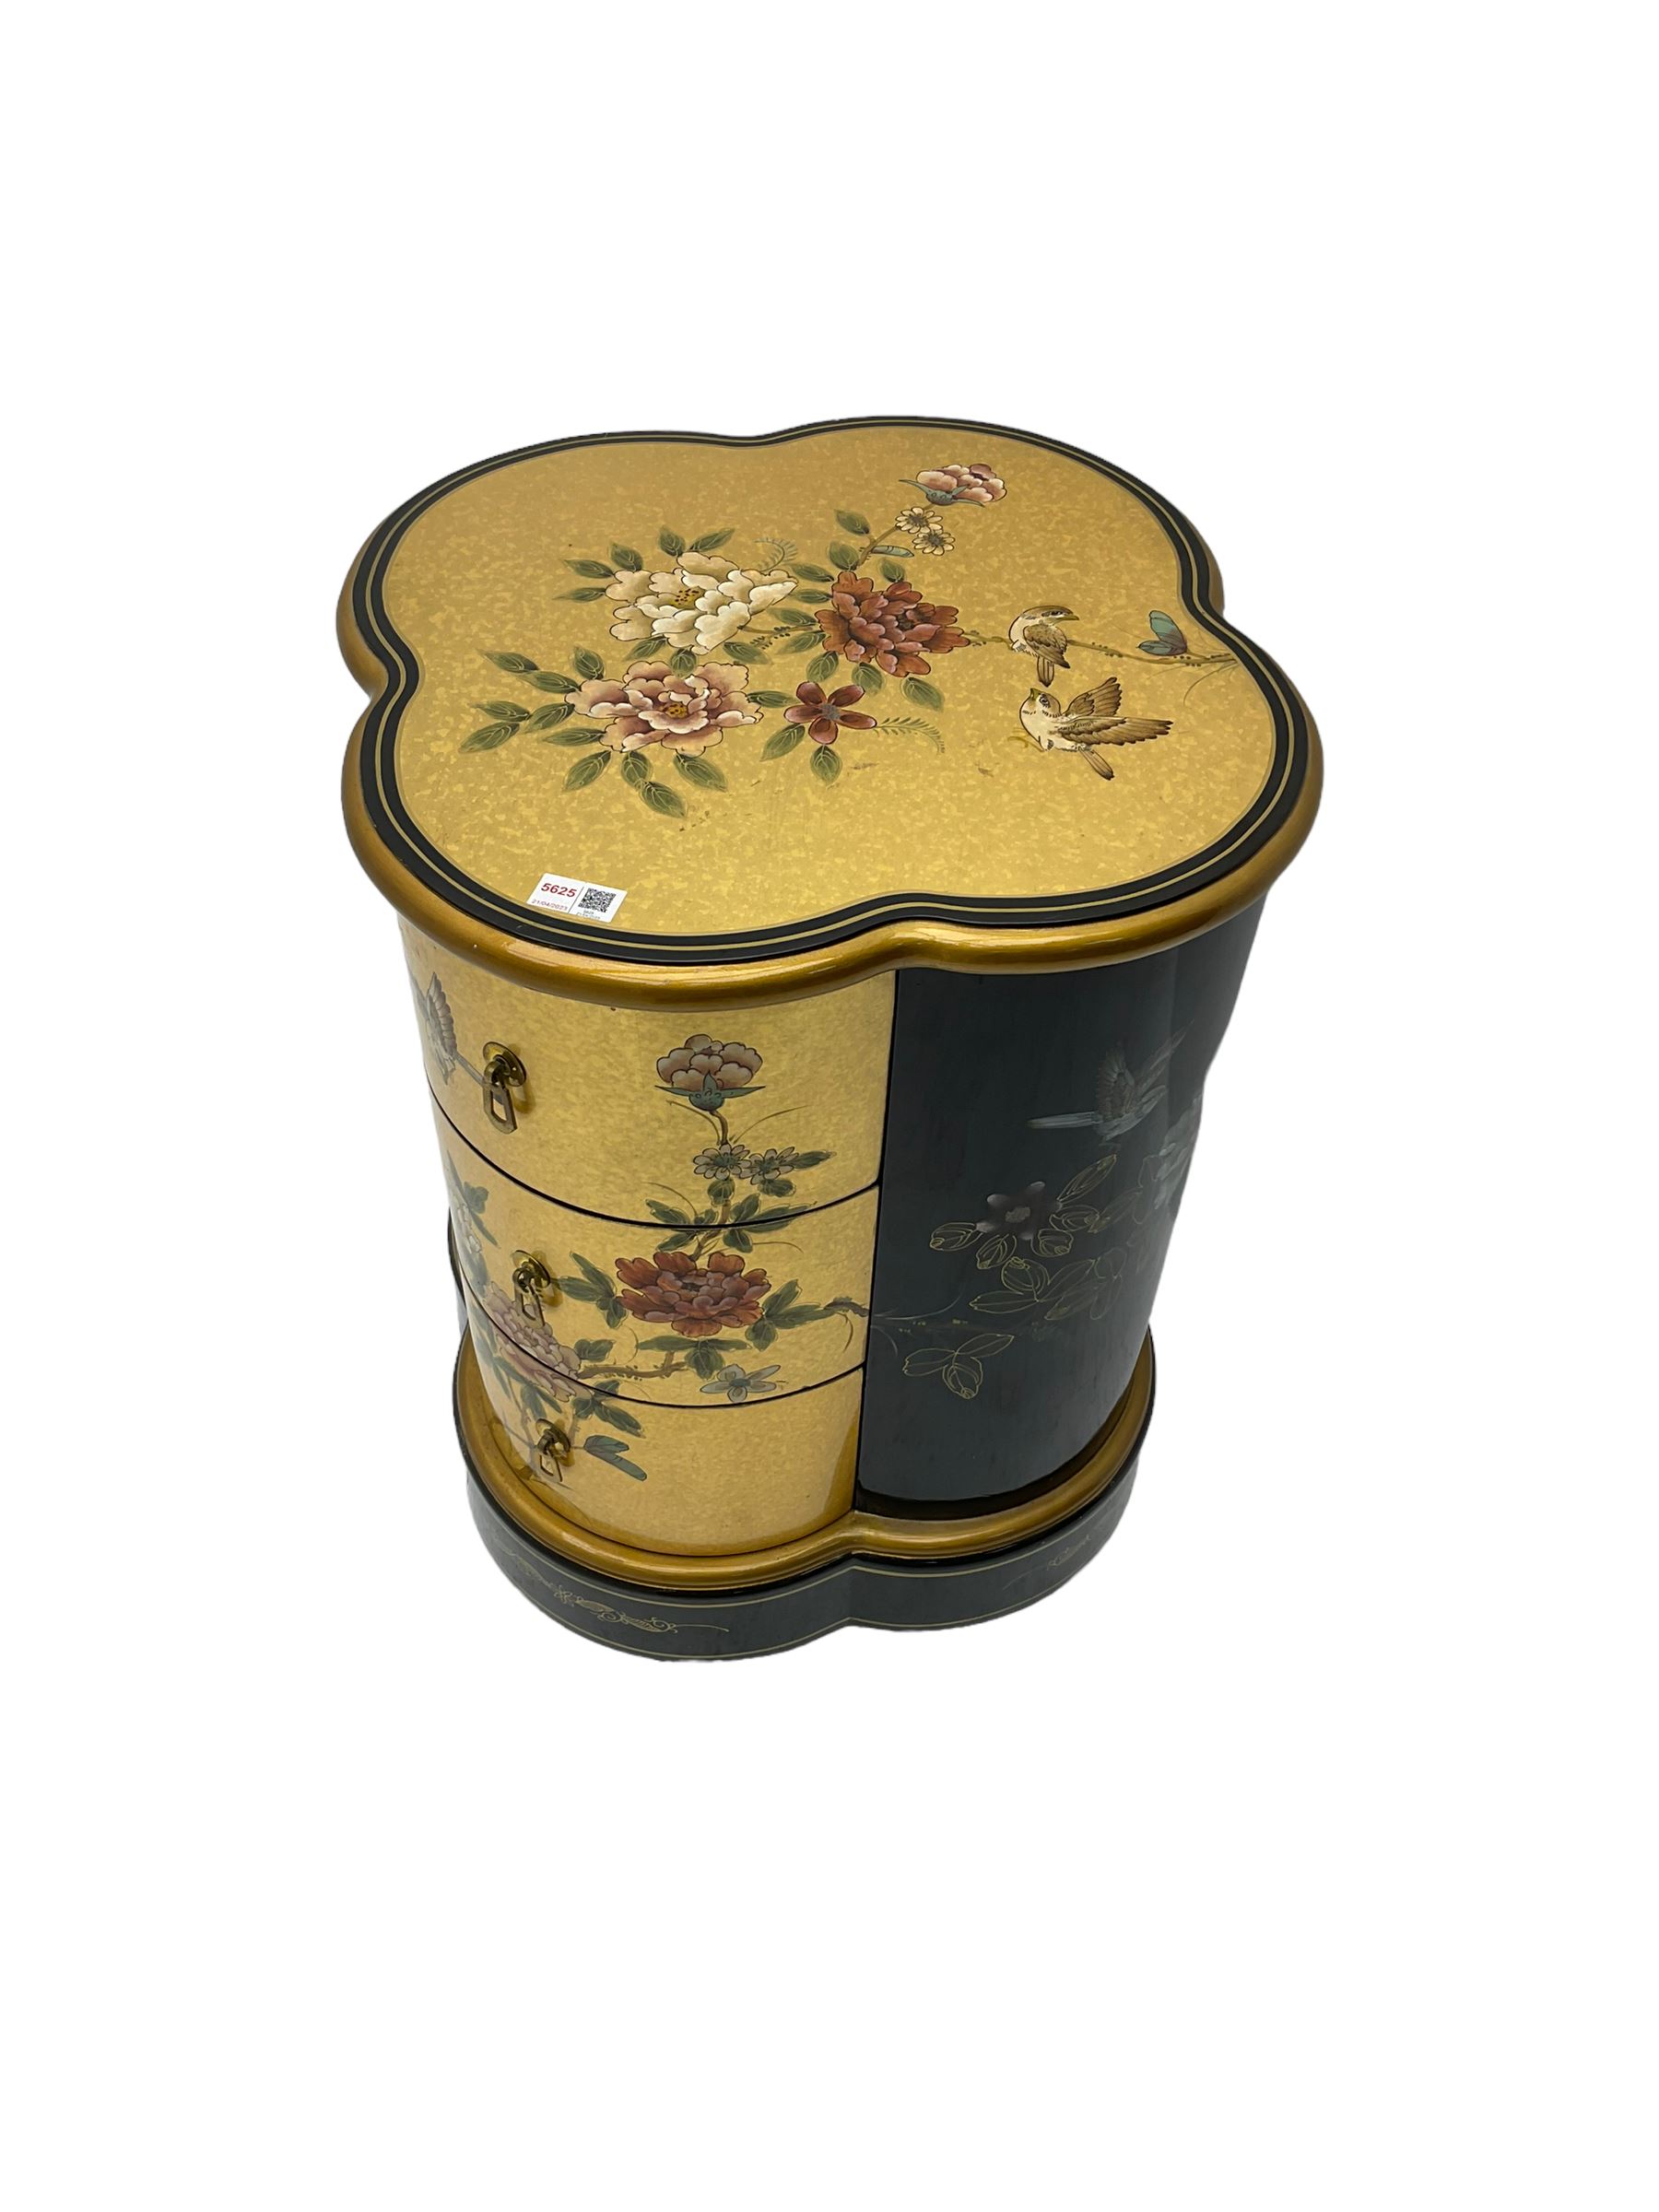 Black and gold lacquered Chinese design three drawer chest - Image 2 of 2